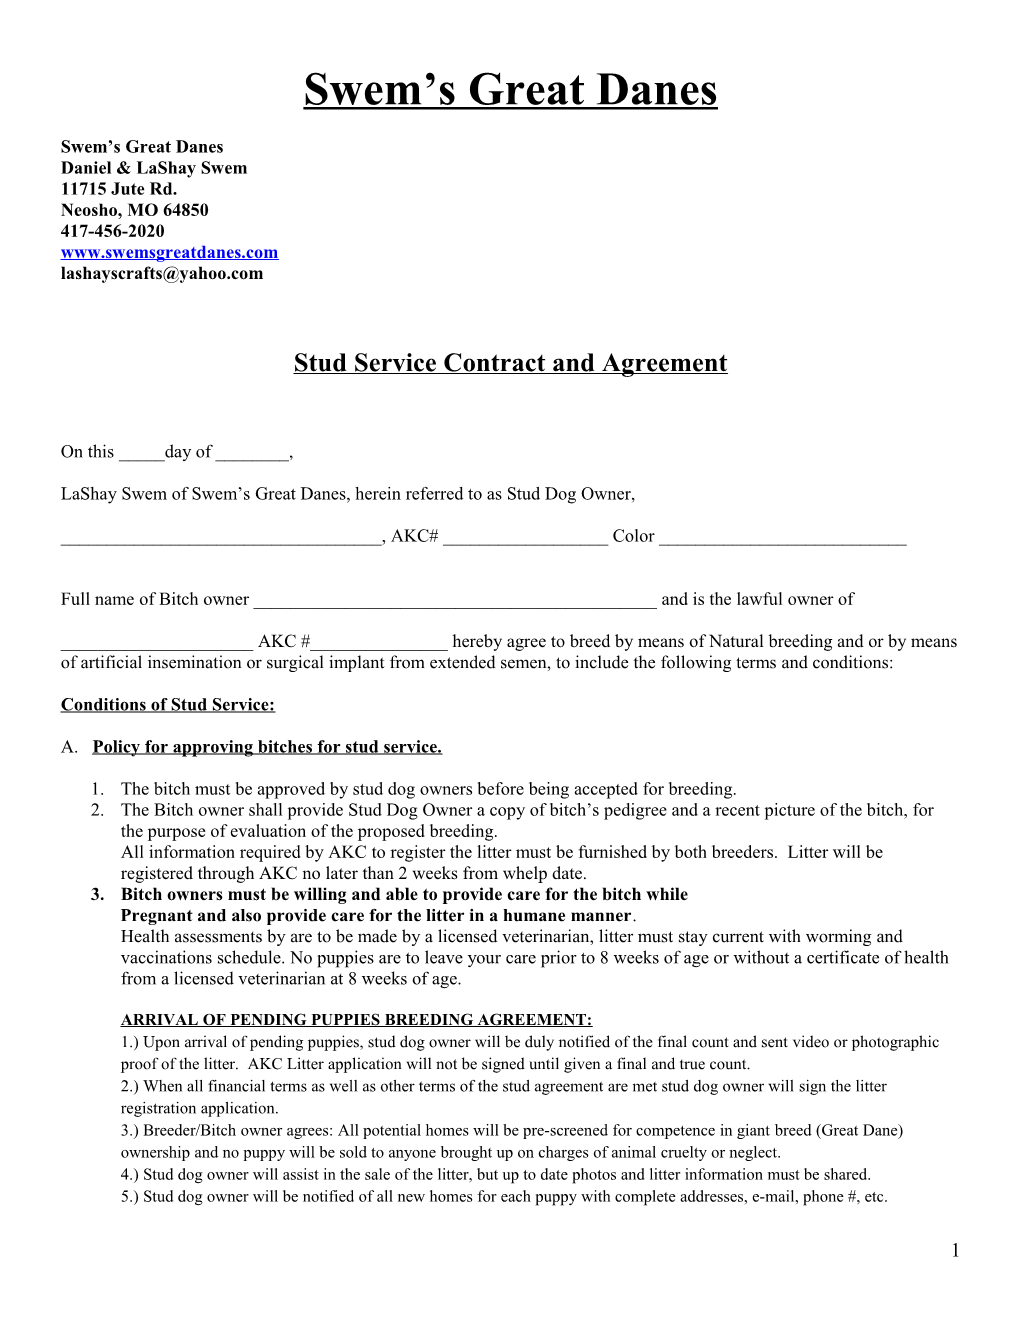 Dowats Stud Service Contract and Agreement